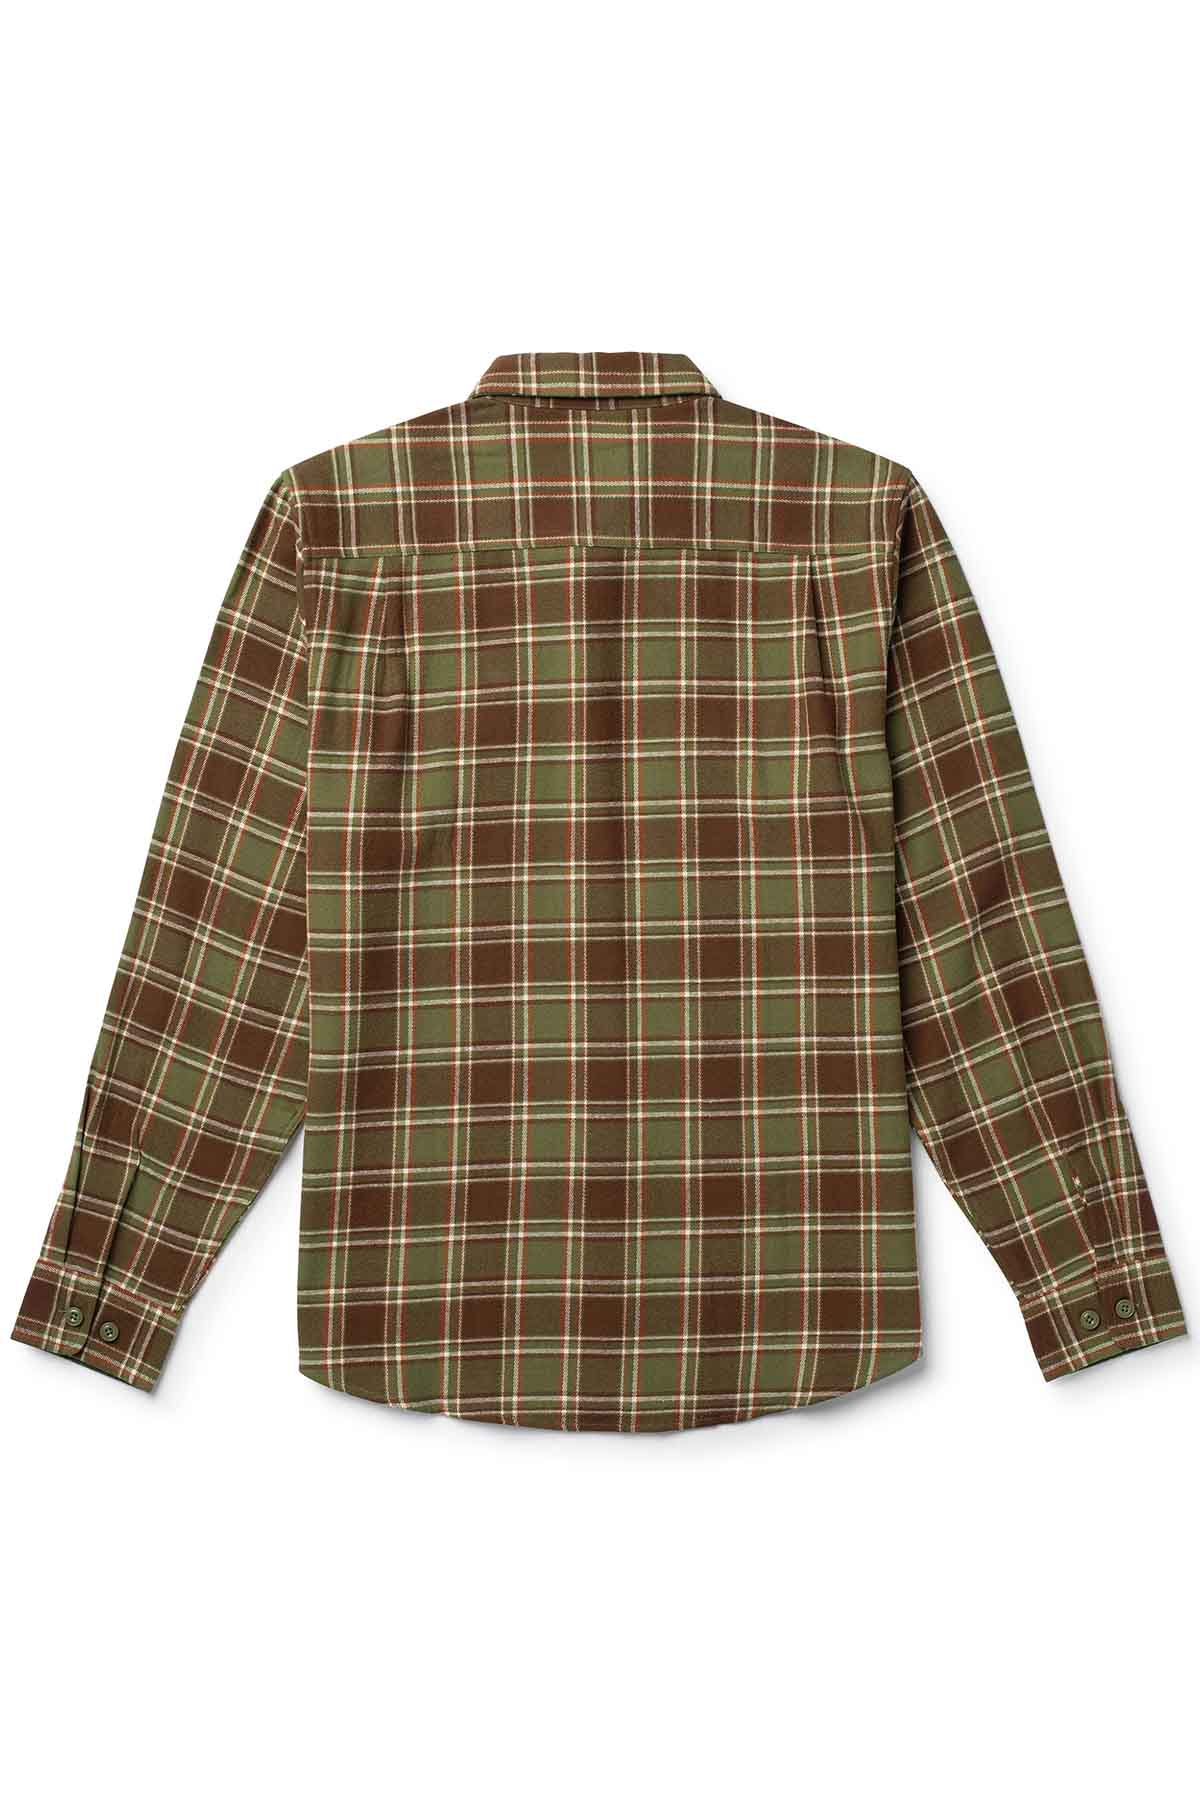 Seager - Calico Flannel - Olive Brown - Back